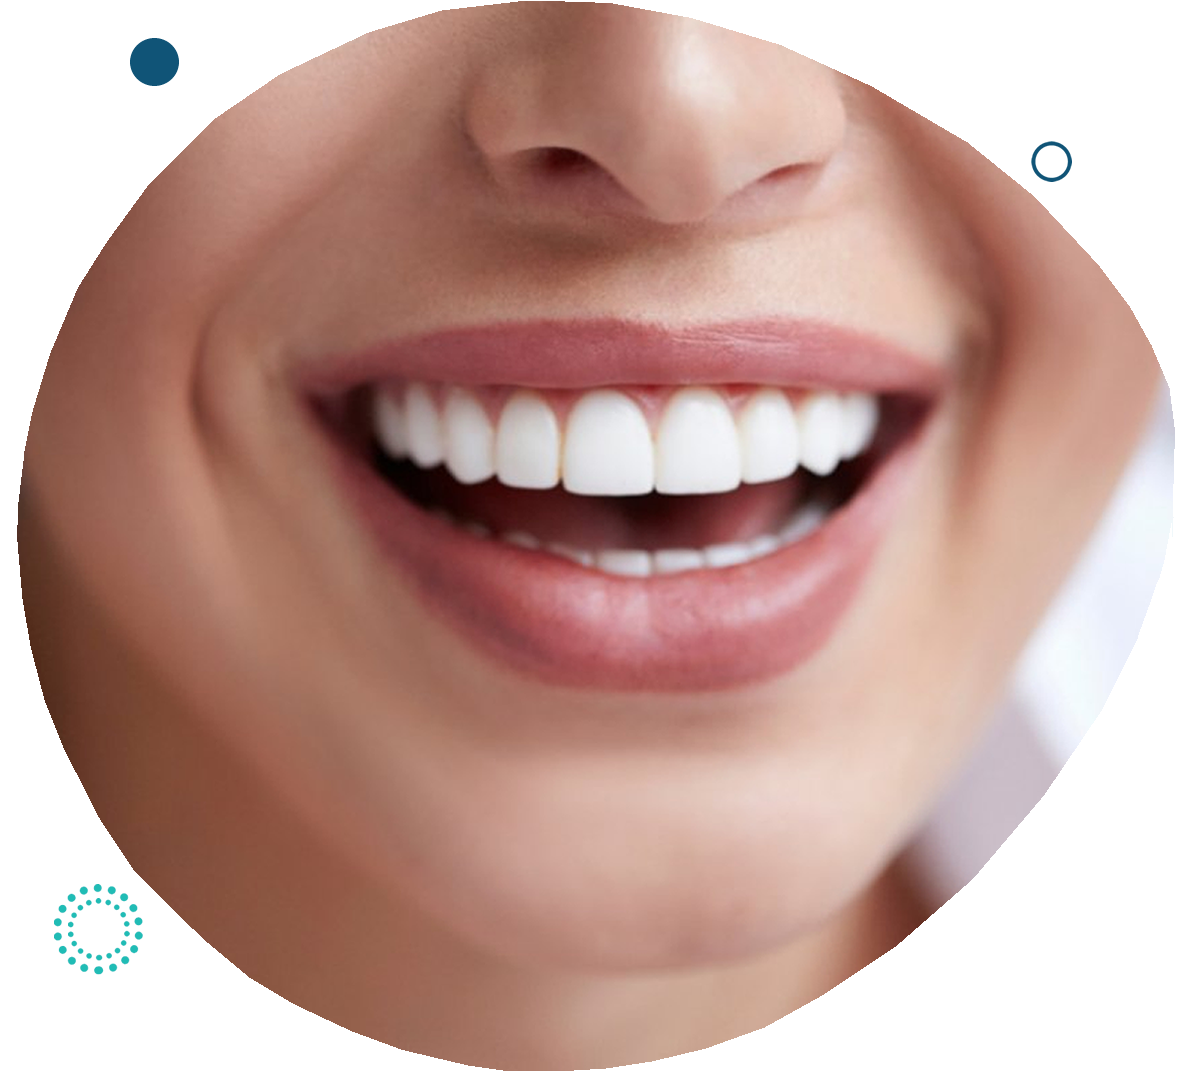 https://aridentistry.ca/wp-content/uploads/2023/02/cosmetic-dentist-london-ontario.png